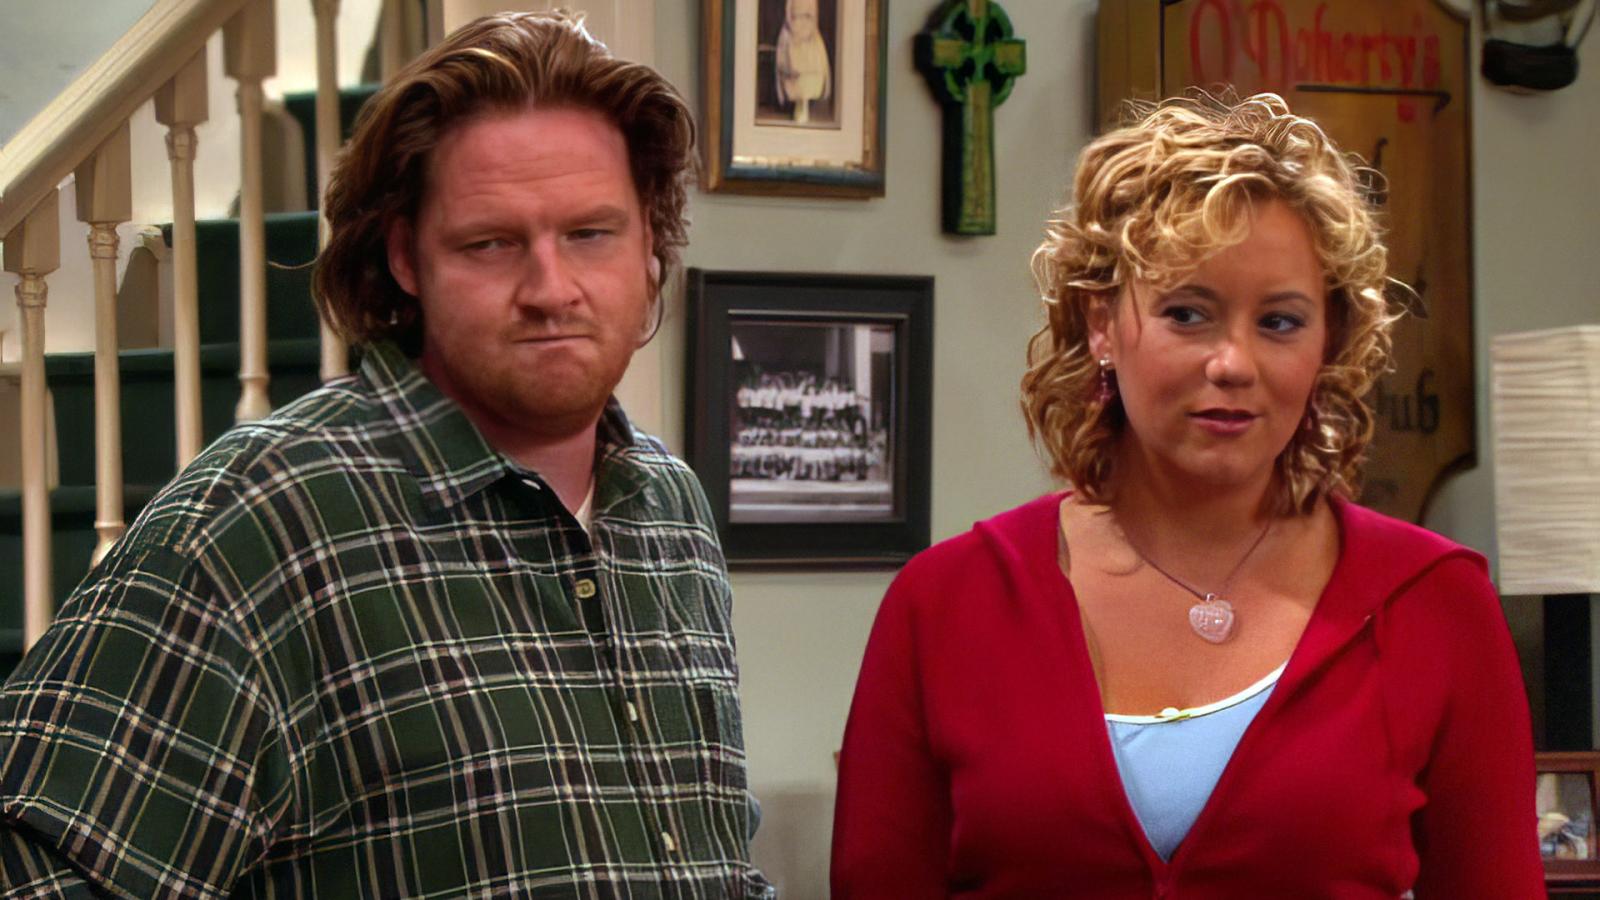 15 Nostalgic Sitcoms That Make for Perfect Comfort Viewing - image 14